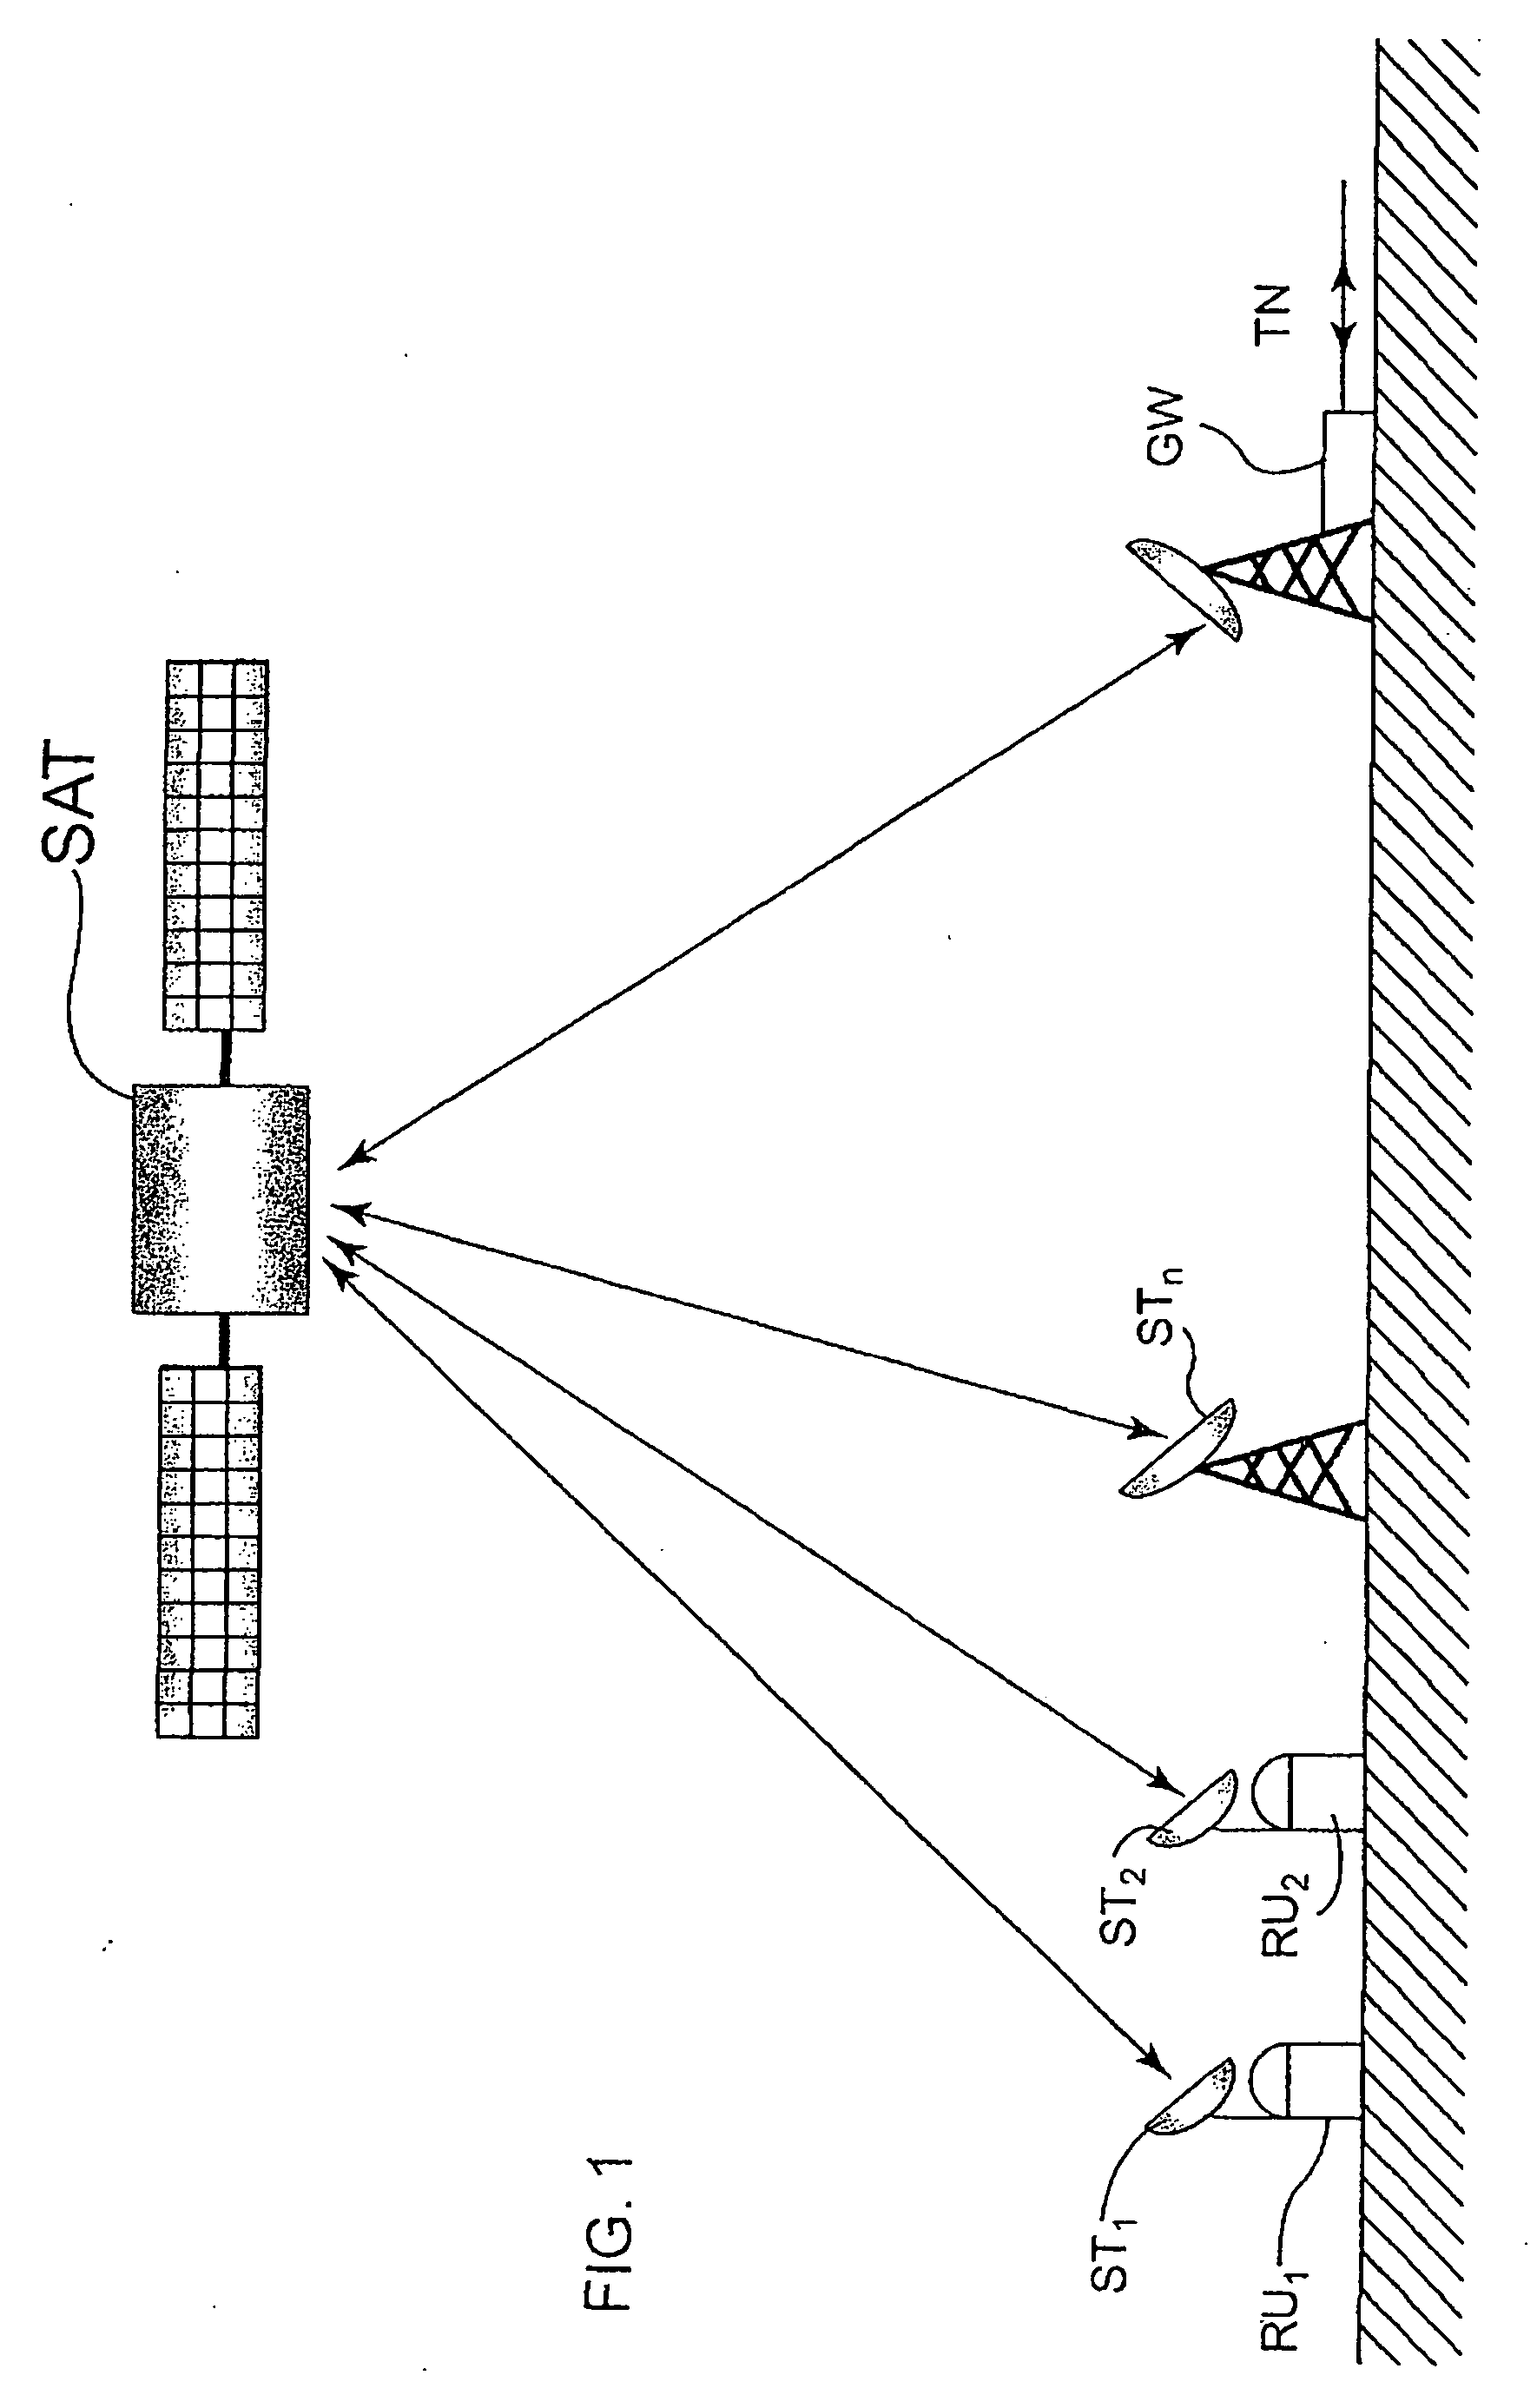 Method of packet mode digital communication over a transmission channel shared by a plurality of users